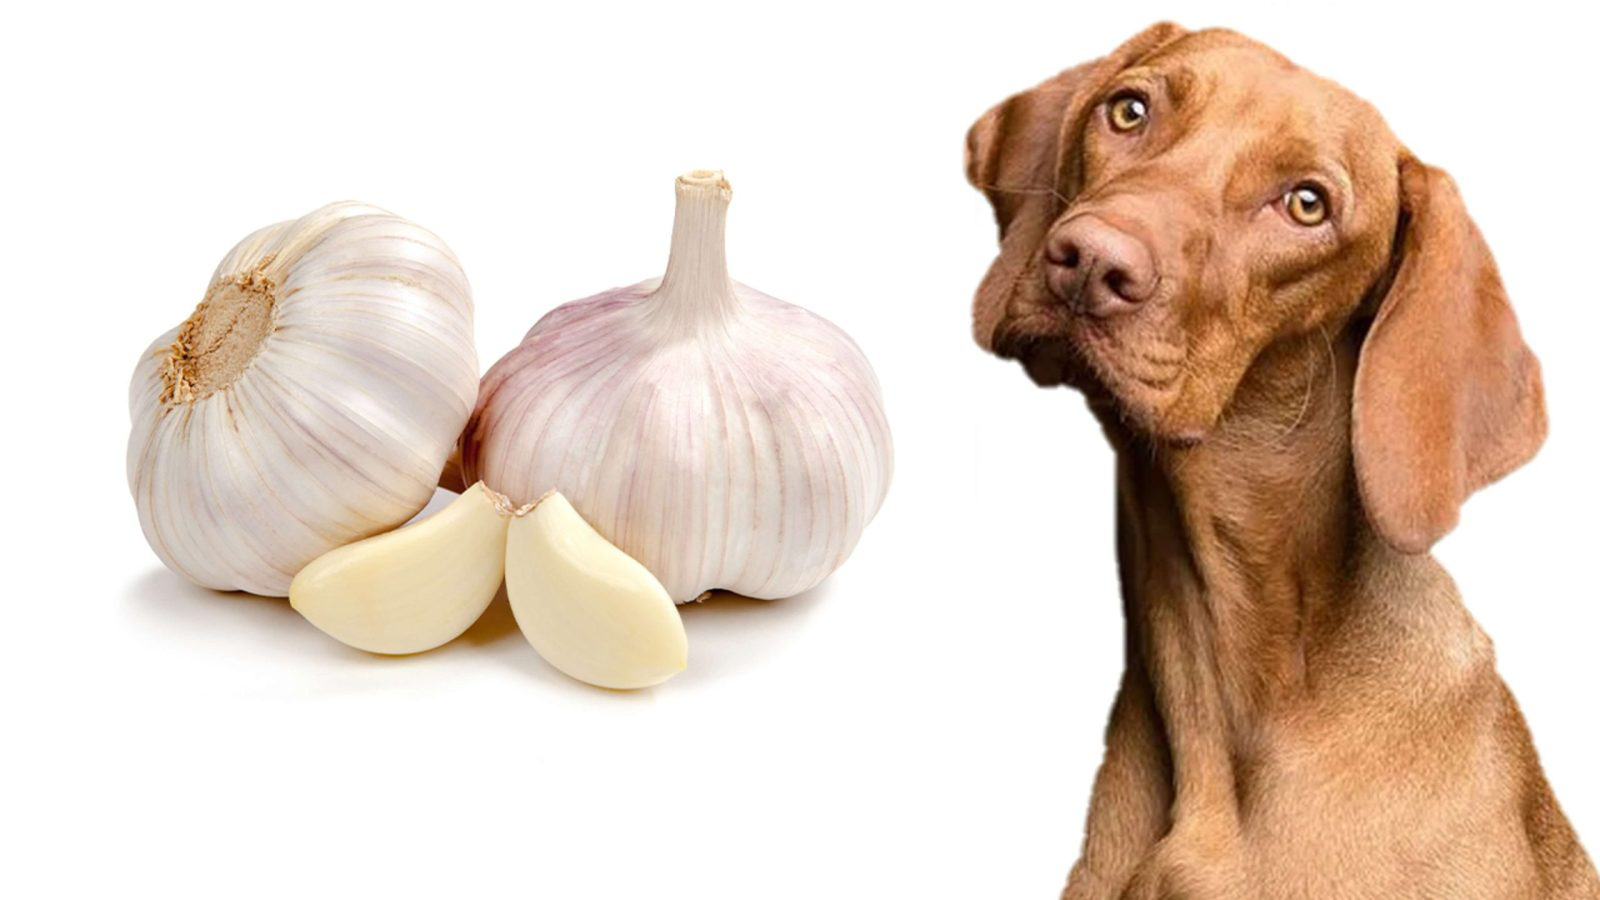 Is garlic safe for pets?